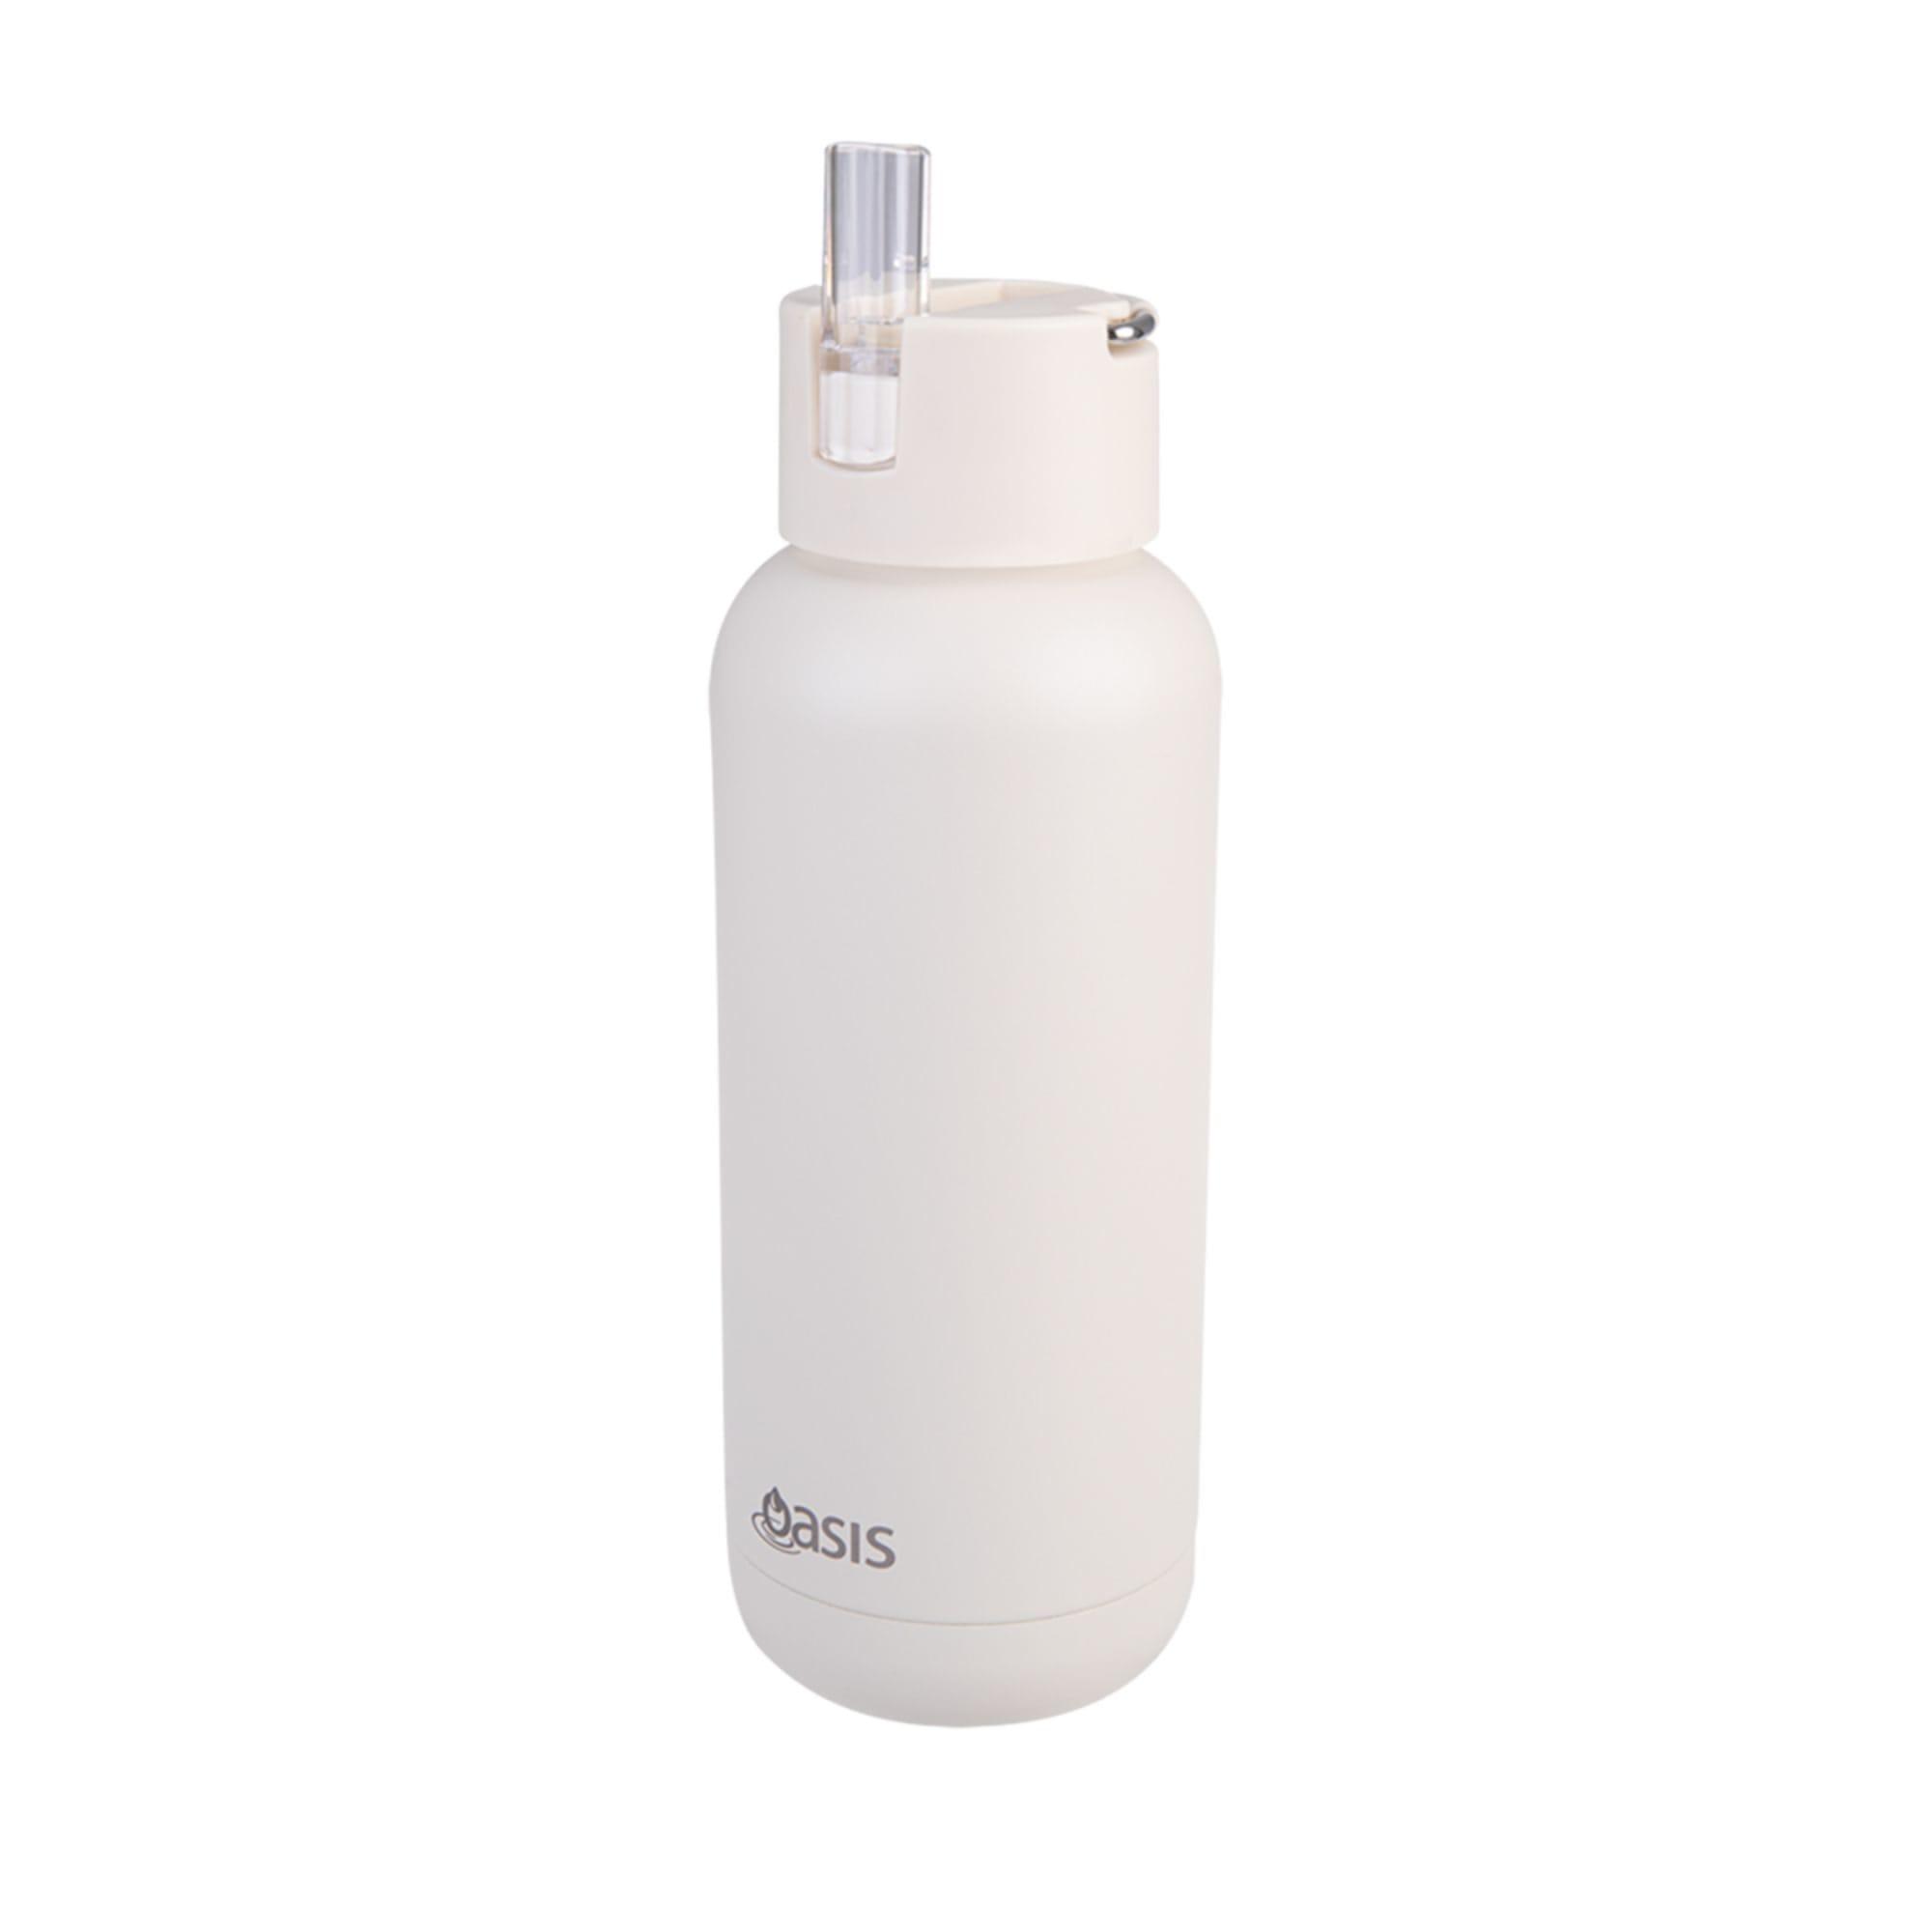 Oasis Moda Triple Wall Insulated Drink Bottle 1L Alabaster Image 4